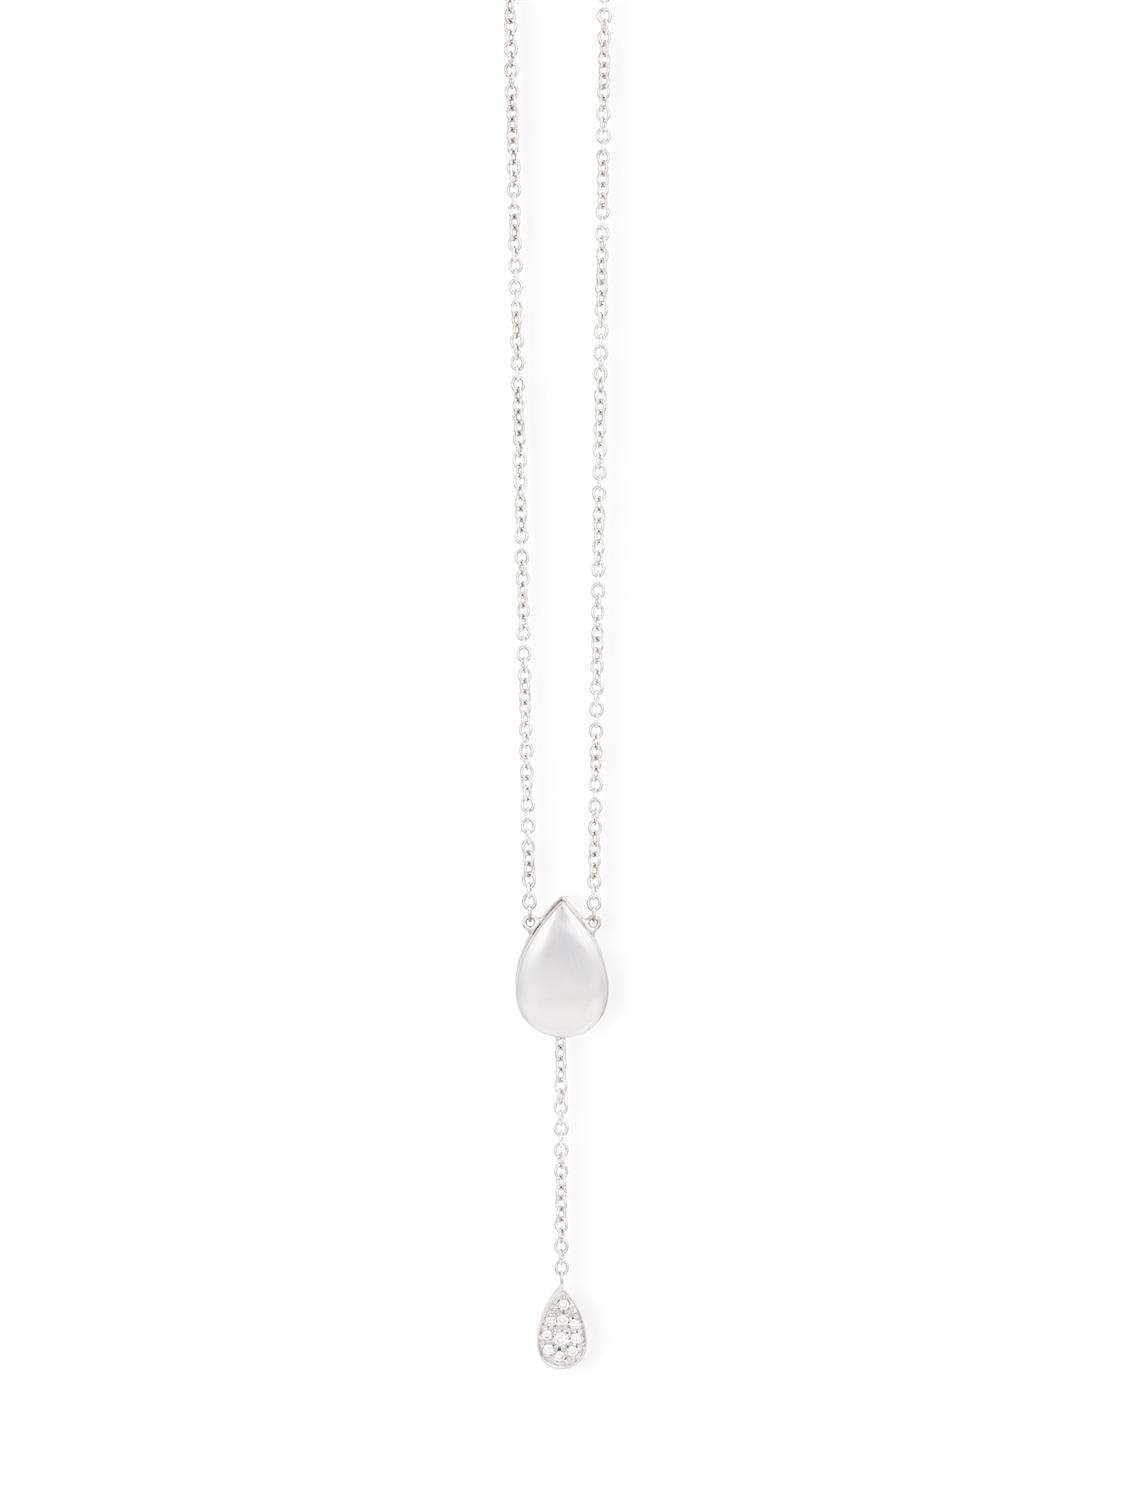 A DIAMOND 'LIMELIGHT' PENDANT NECKLACE, BY PIAGET The cable-link chain suspending a pear-shaped